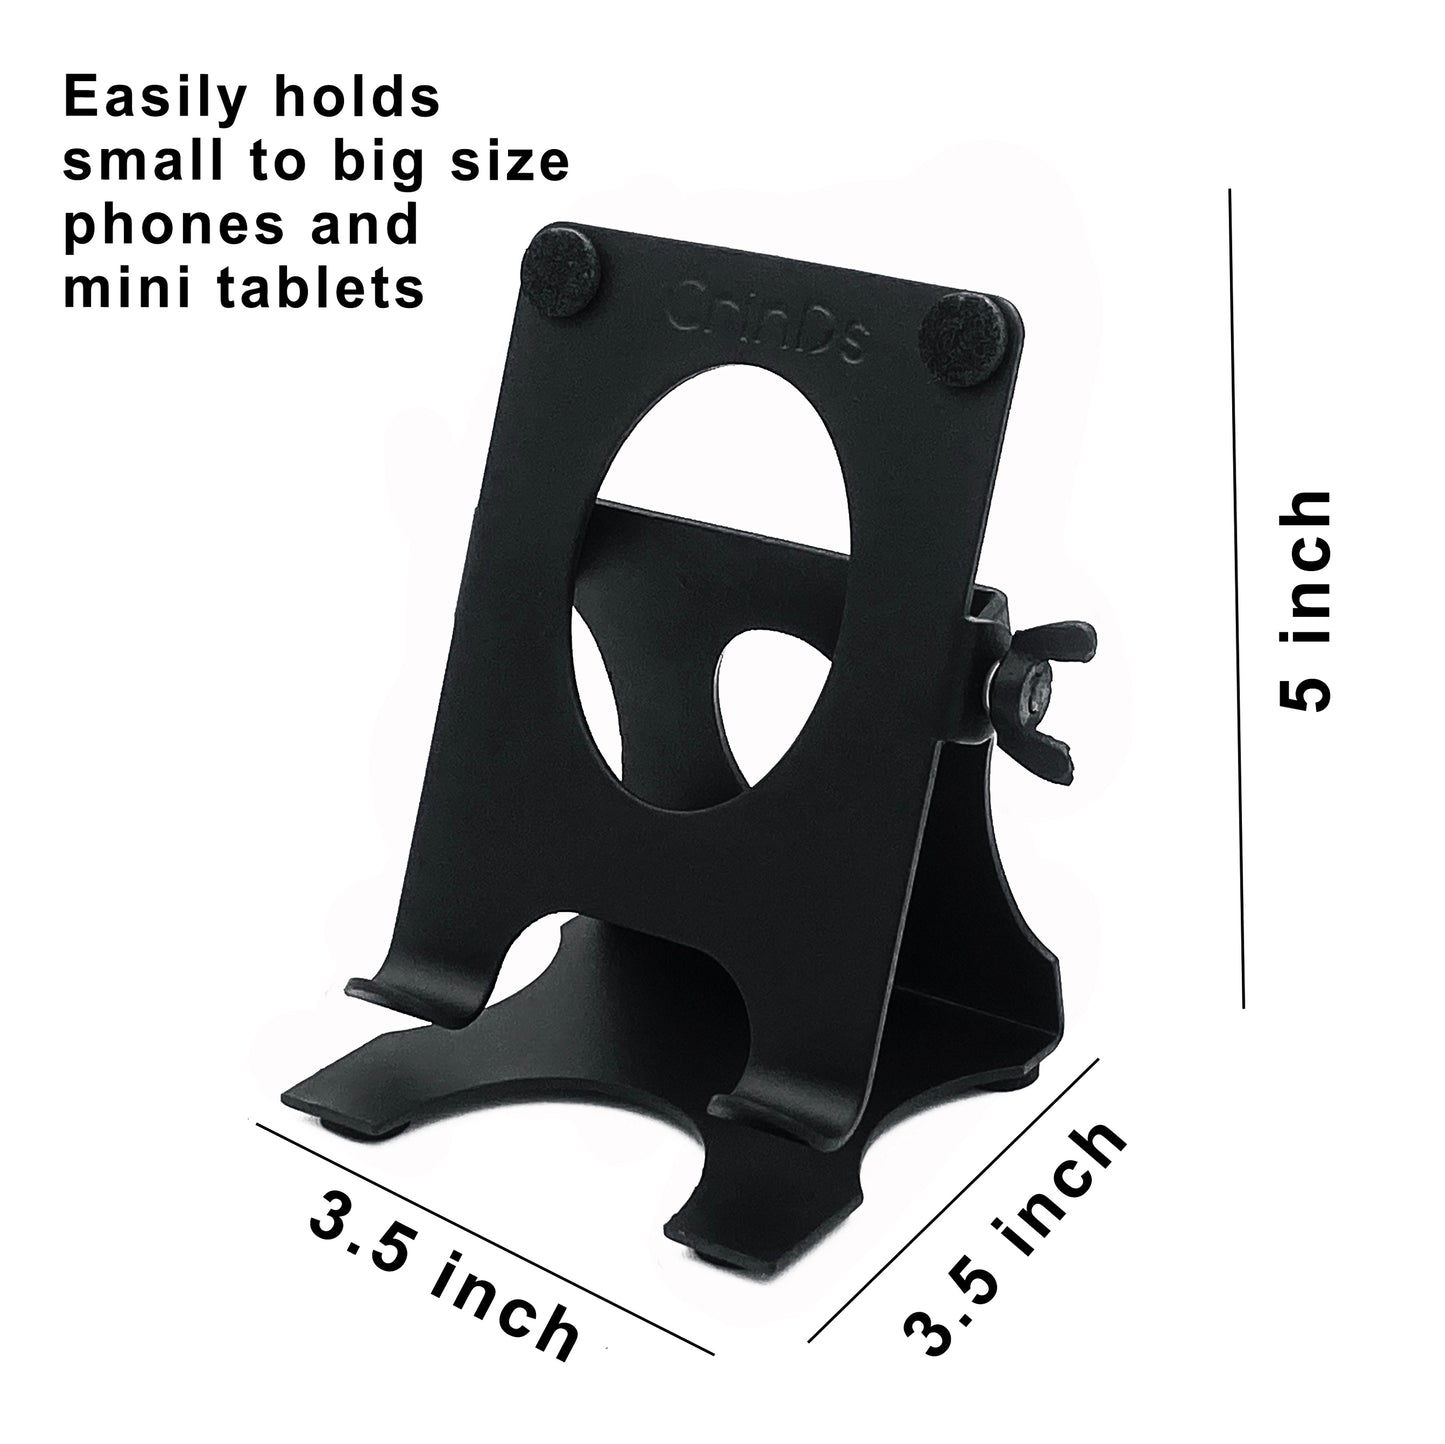 Crinds Pure Metal Mobile Stand for Table(Black)